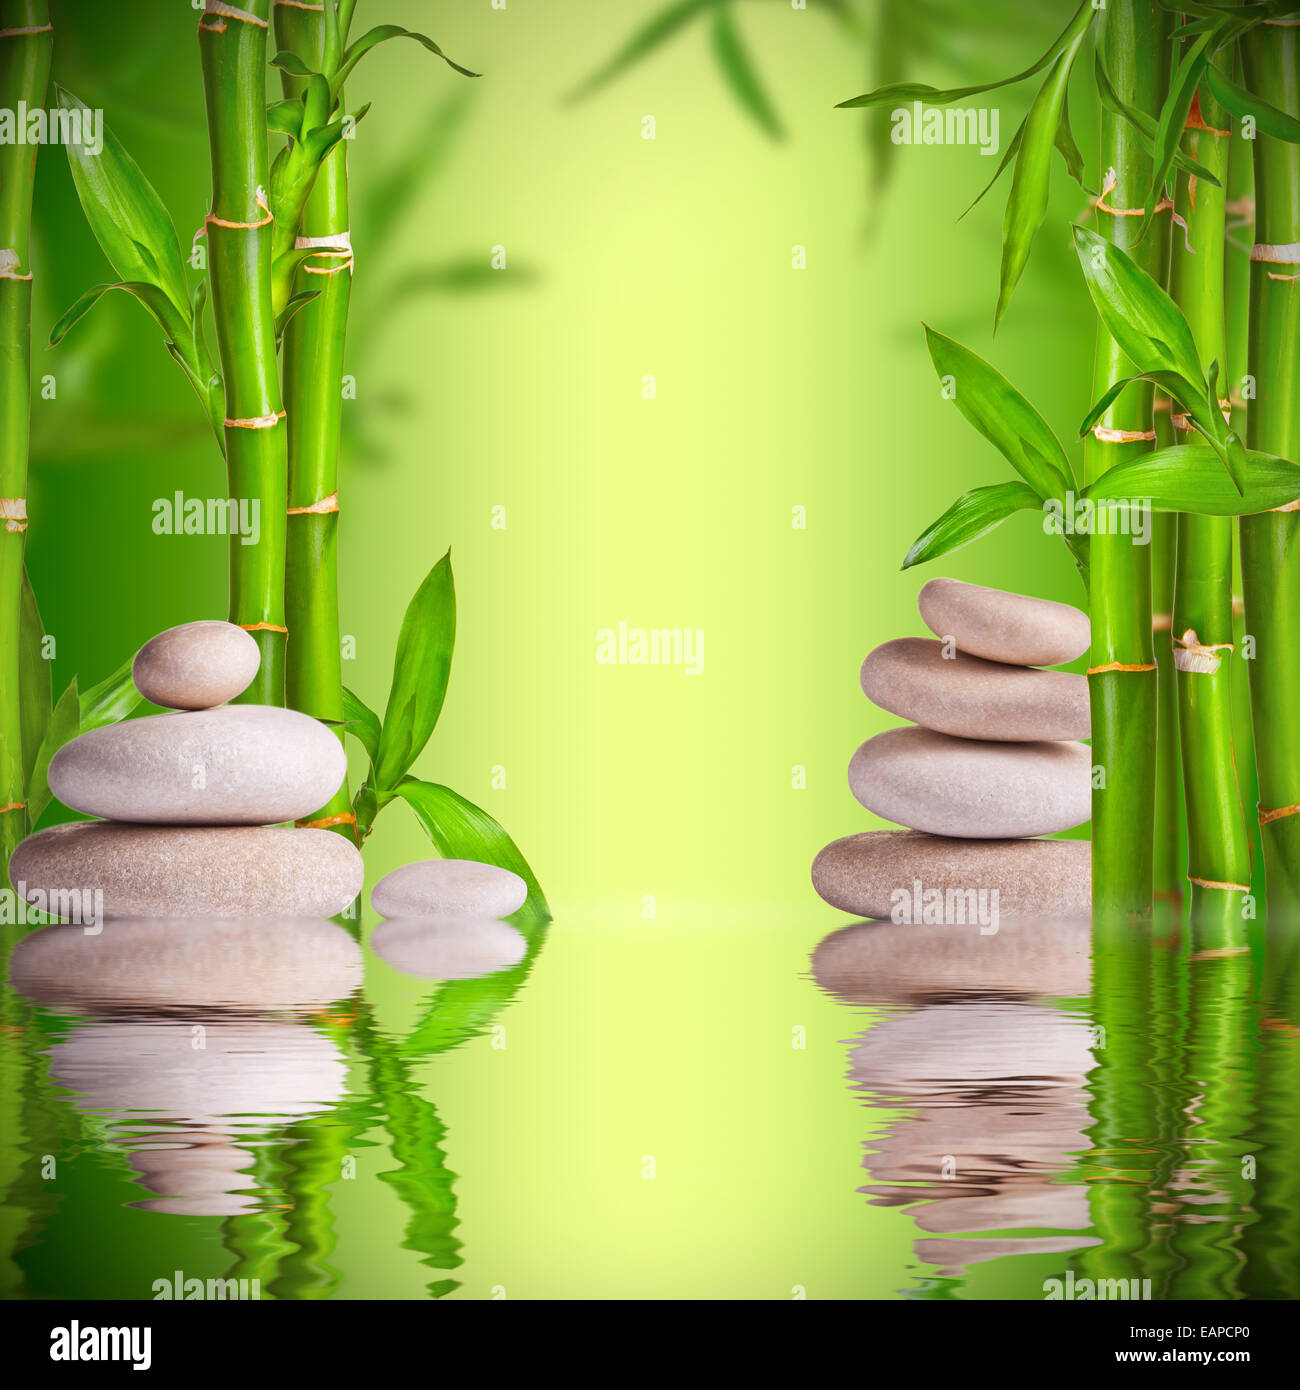 Spa still life with white stones and bamboo sprouts with free space for text Stock Photo